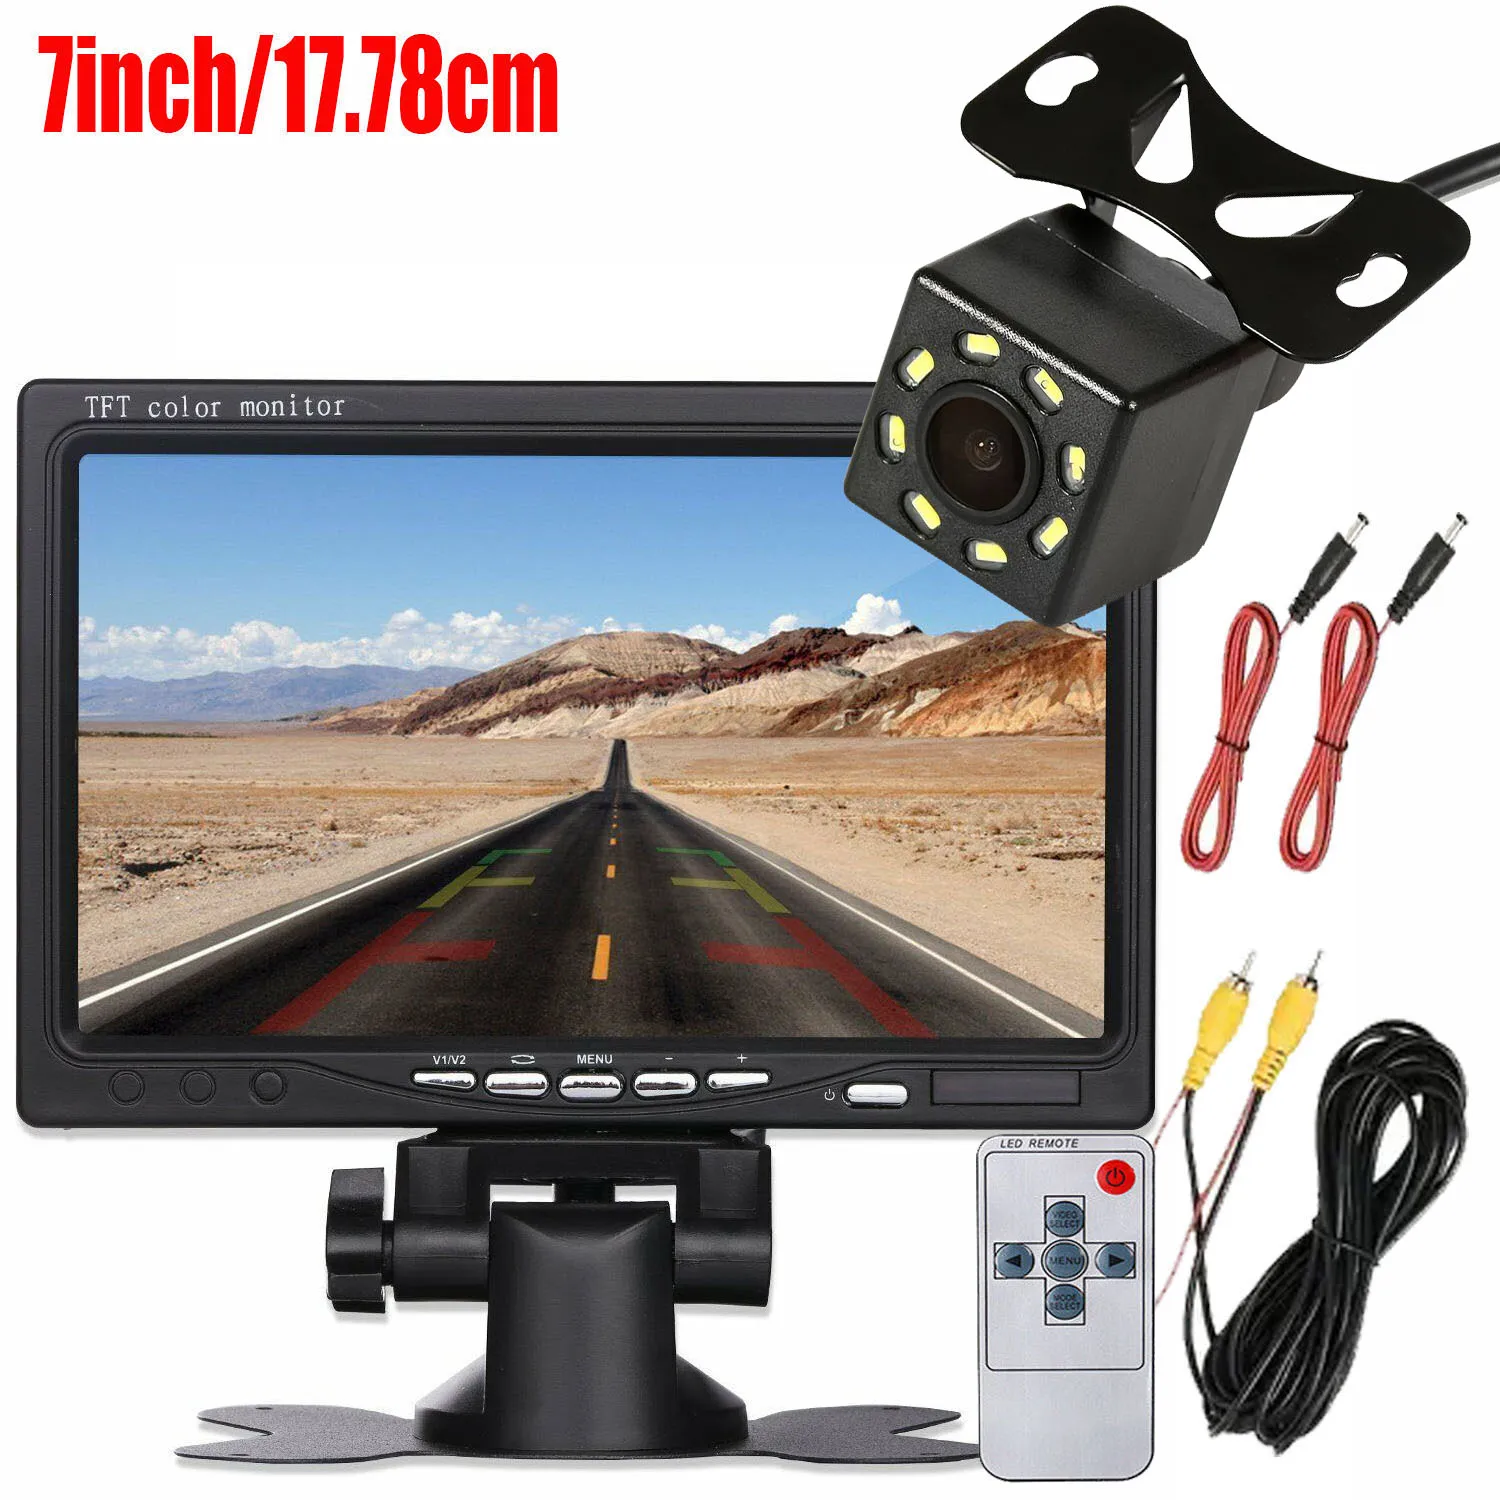 

7" Car TFT LCD Screen Monitor Rear View Reversing Backup Camera Kit with 6M Cable for Truck/Bus/RV/Trailer/Tractor/camper